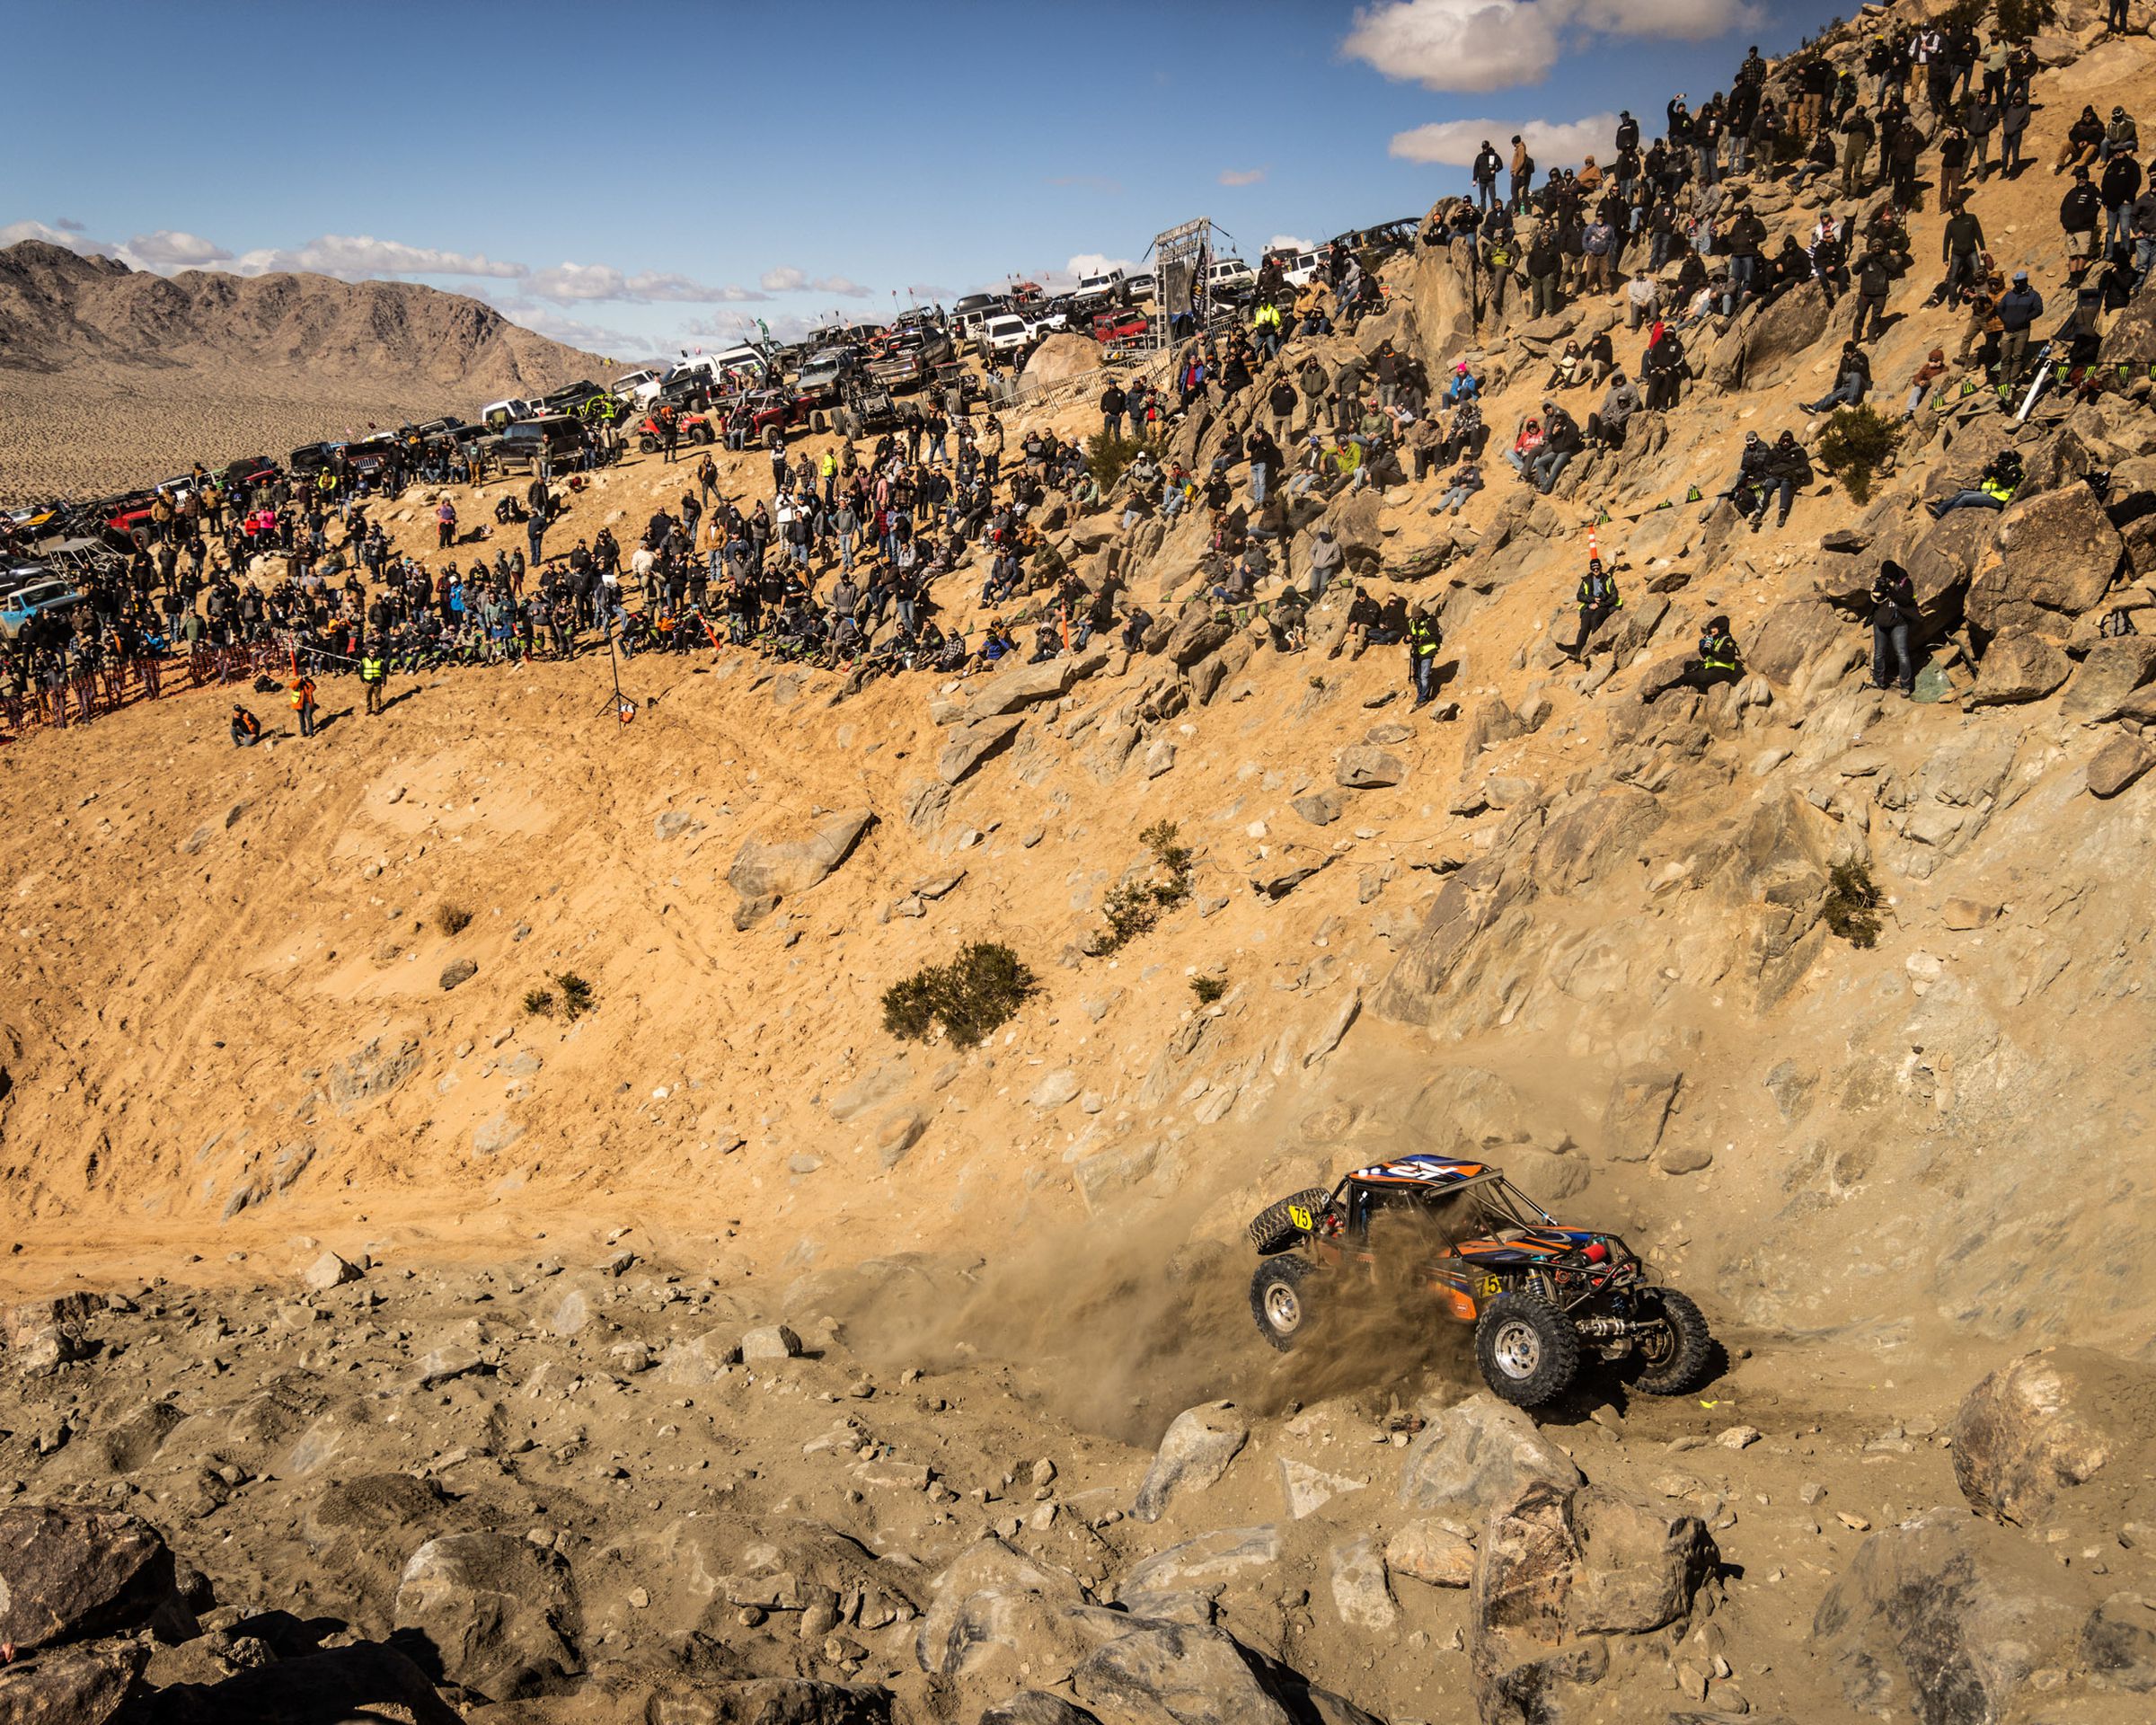 King of the Hammers off-road racing